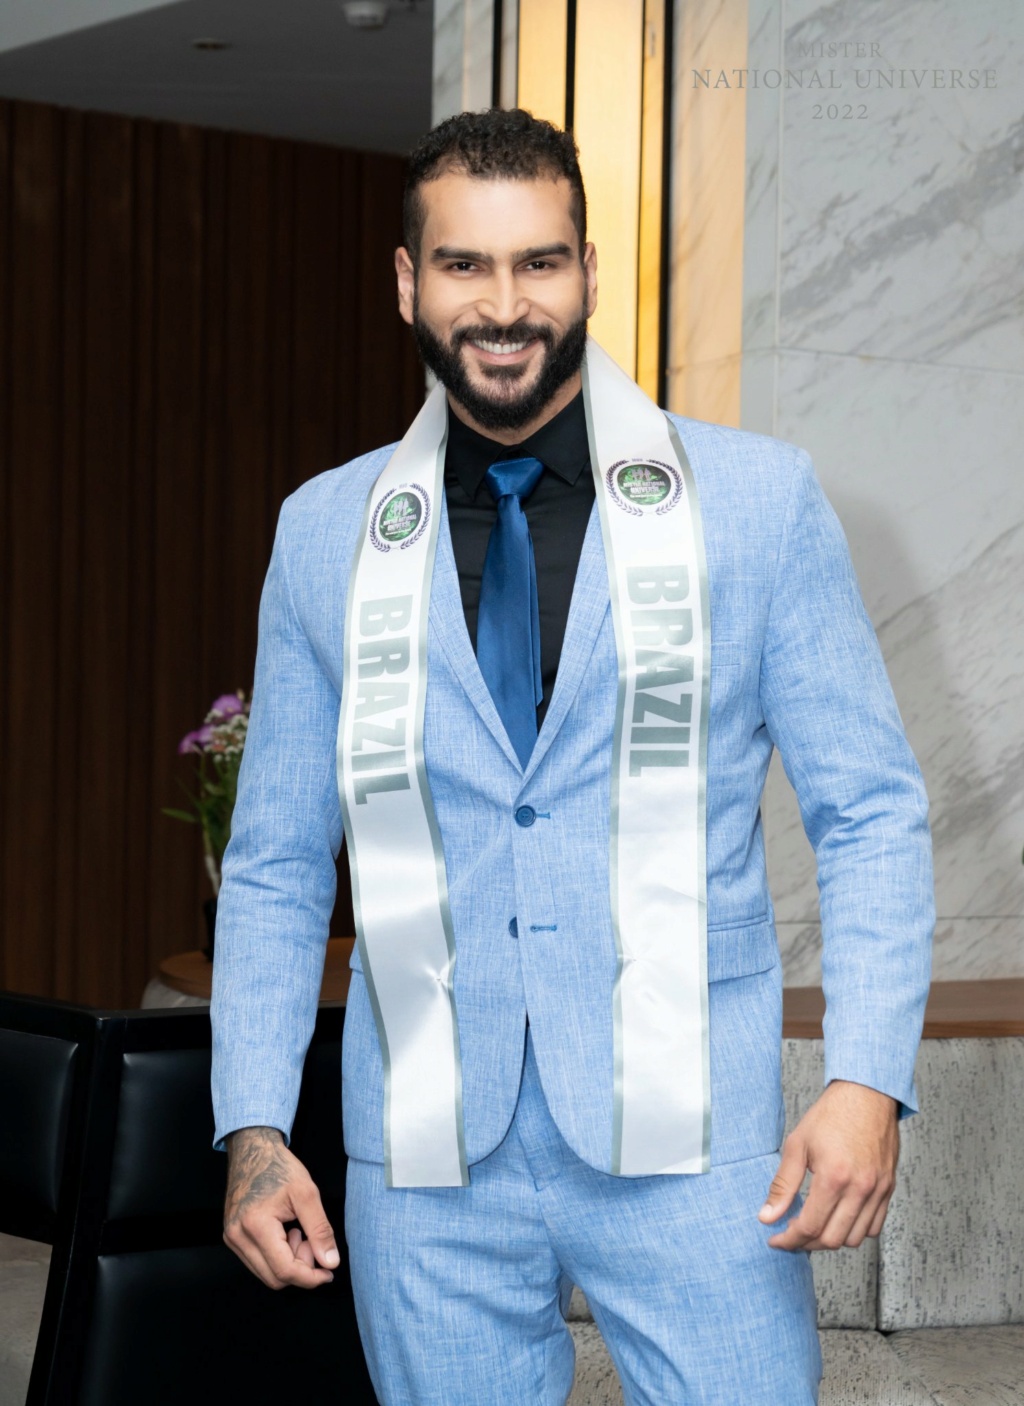 Mister National Universe 2022 is Việt Hoàng from Vietnam 28519910